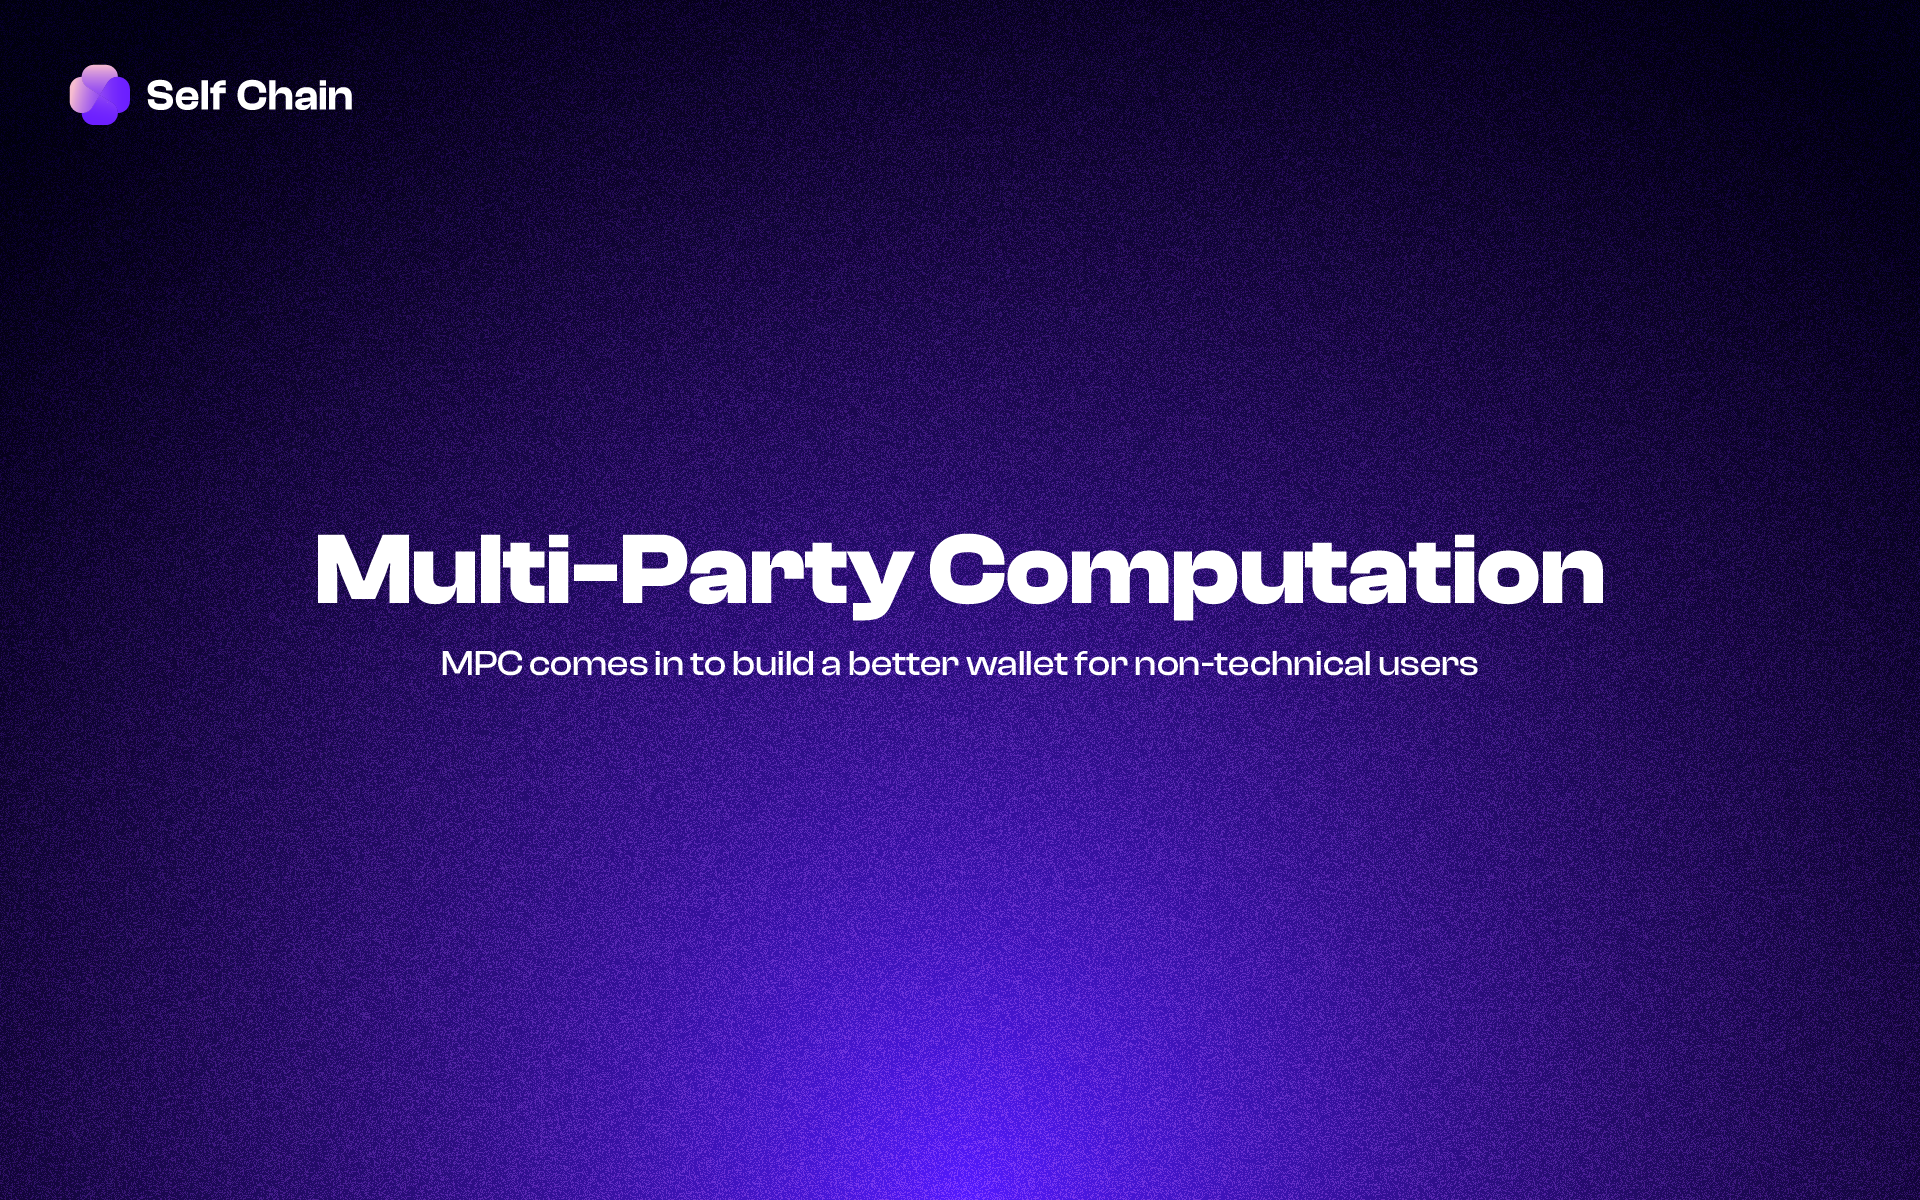 How does Multi-Party Computation help to build a Keyless wallet?